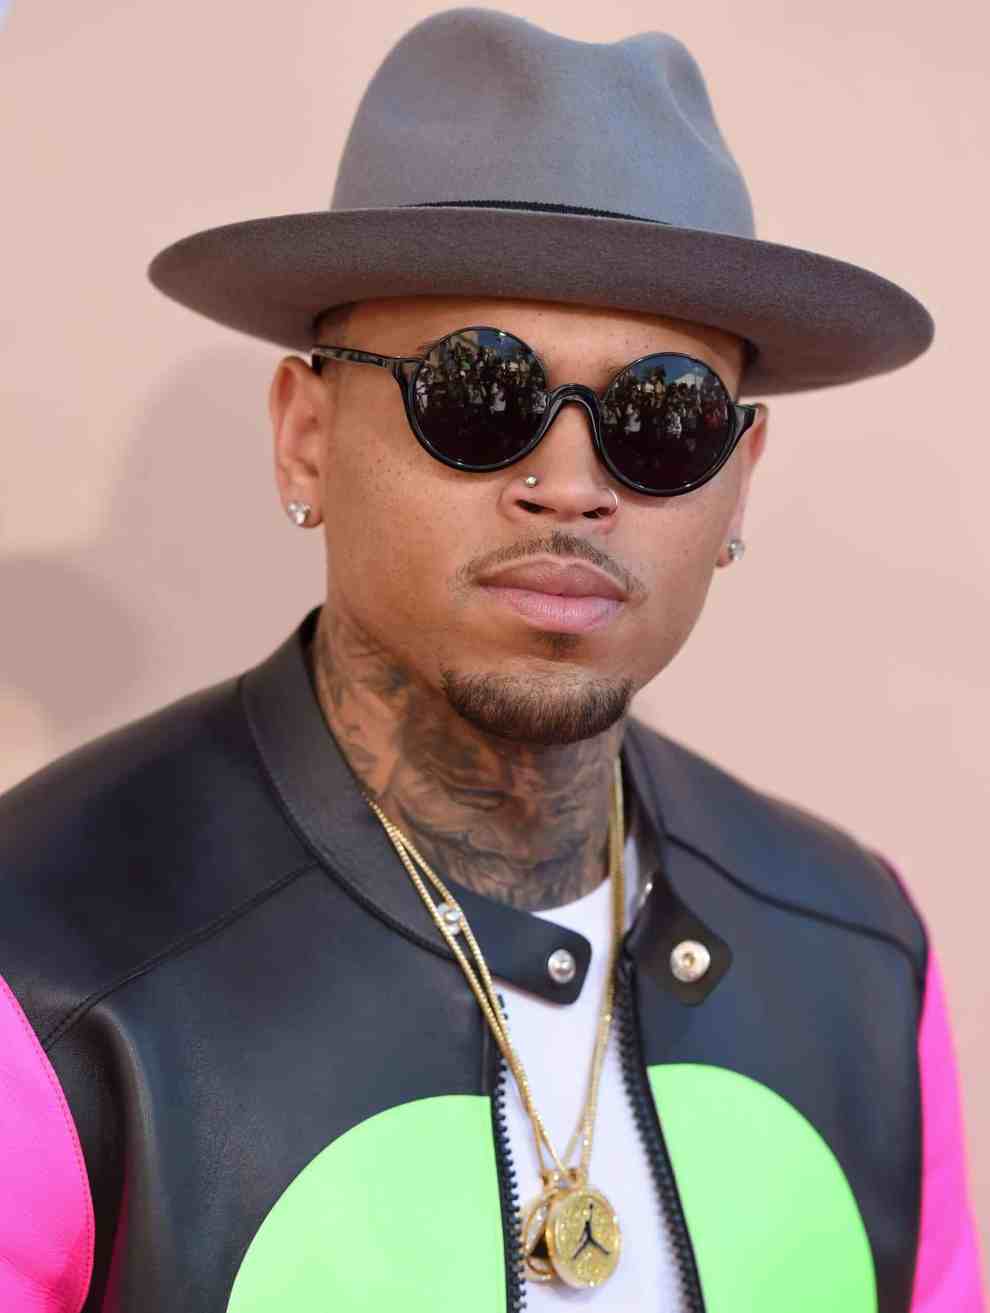 Chris Brown arrives at the 2015 iHeartRadio Music Awards at The Shrine Auditorium